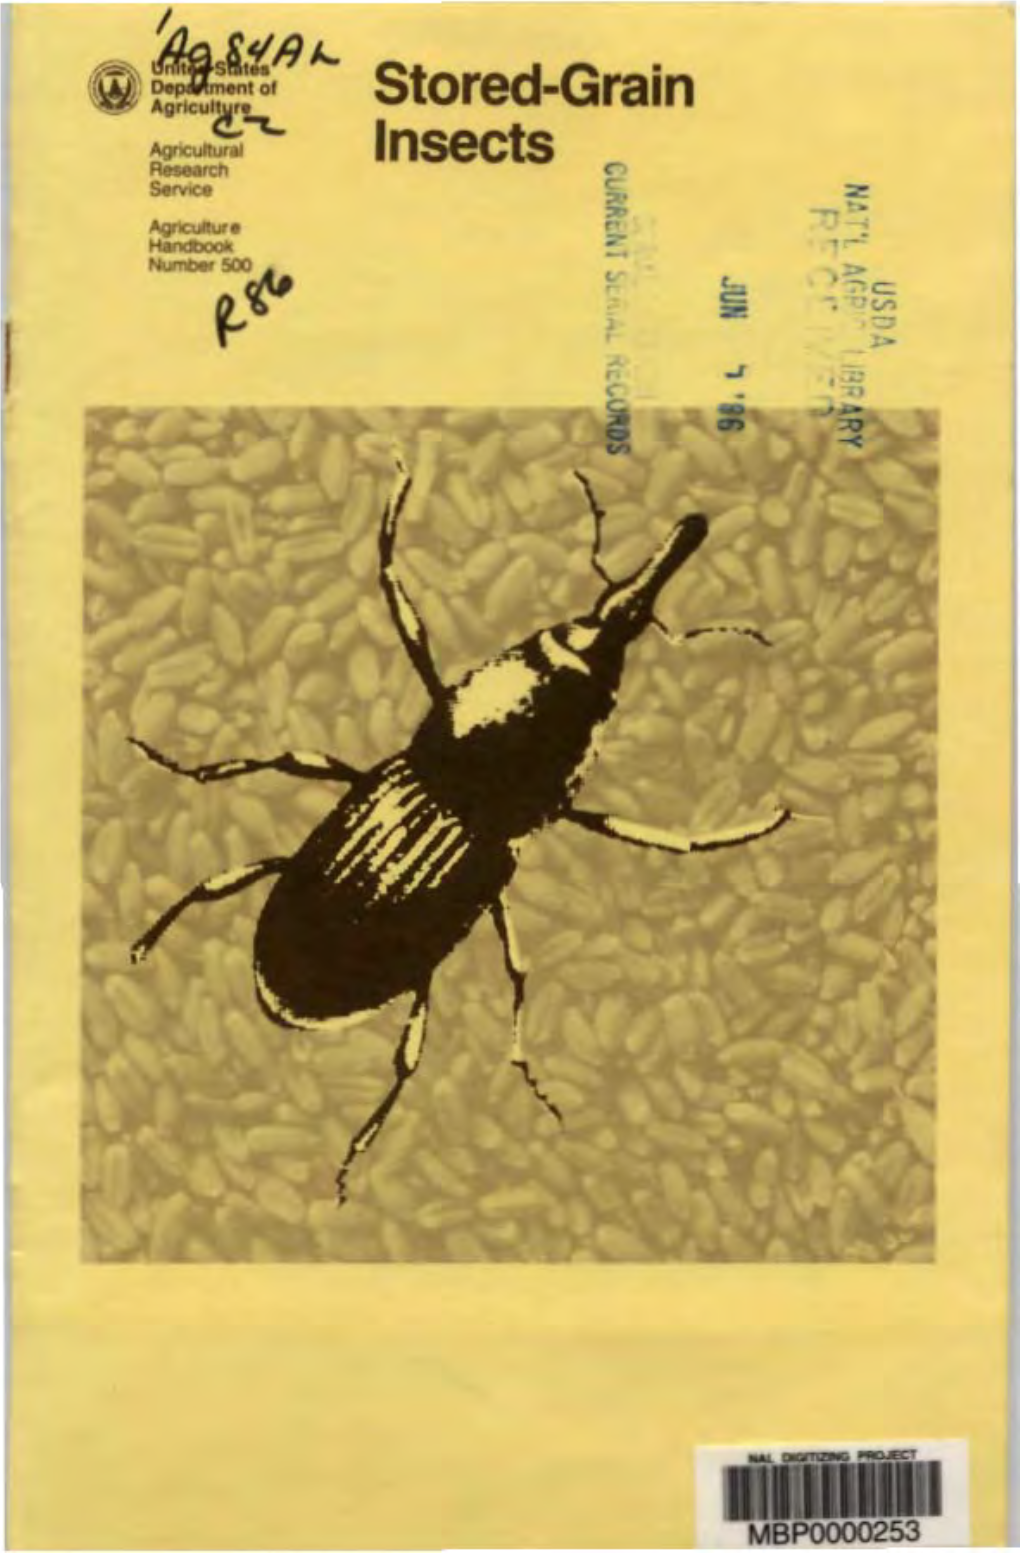 Stored-Grain Insects